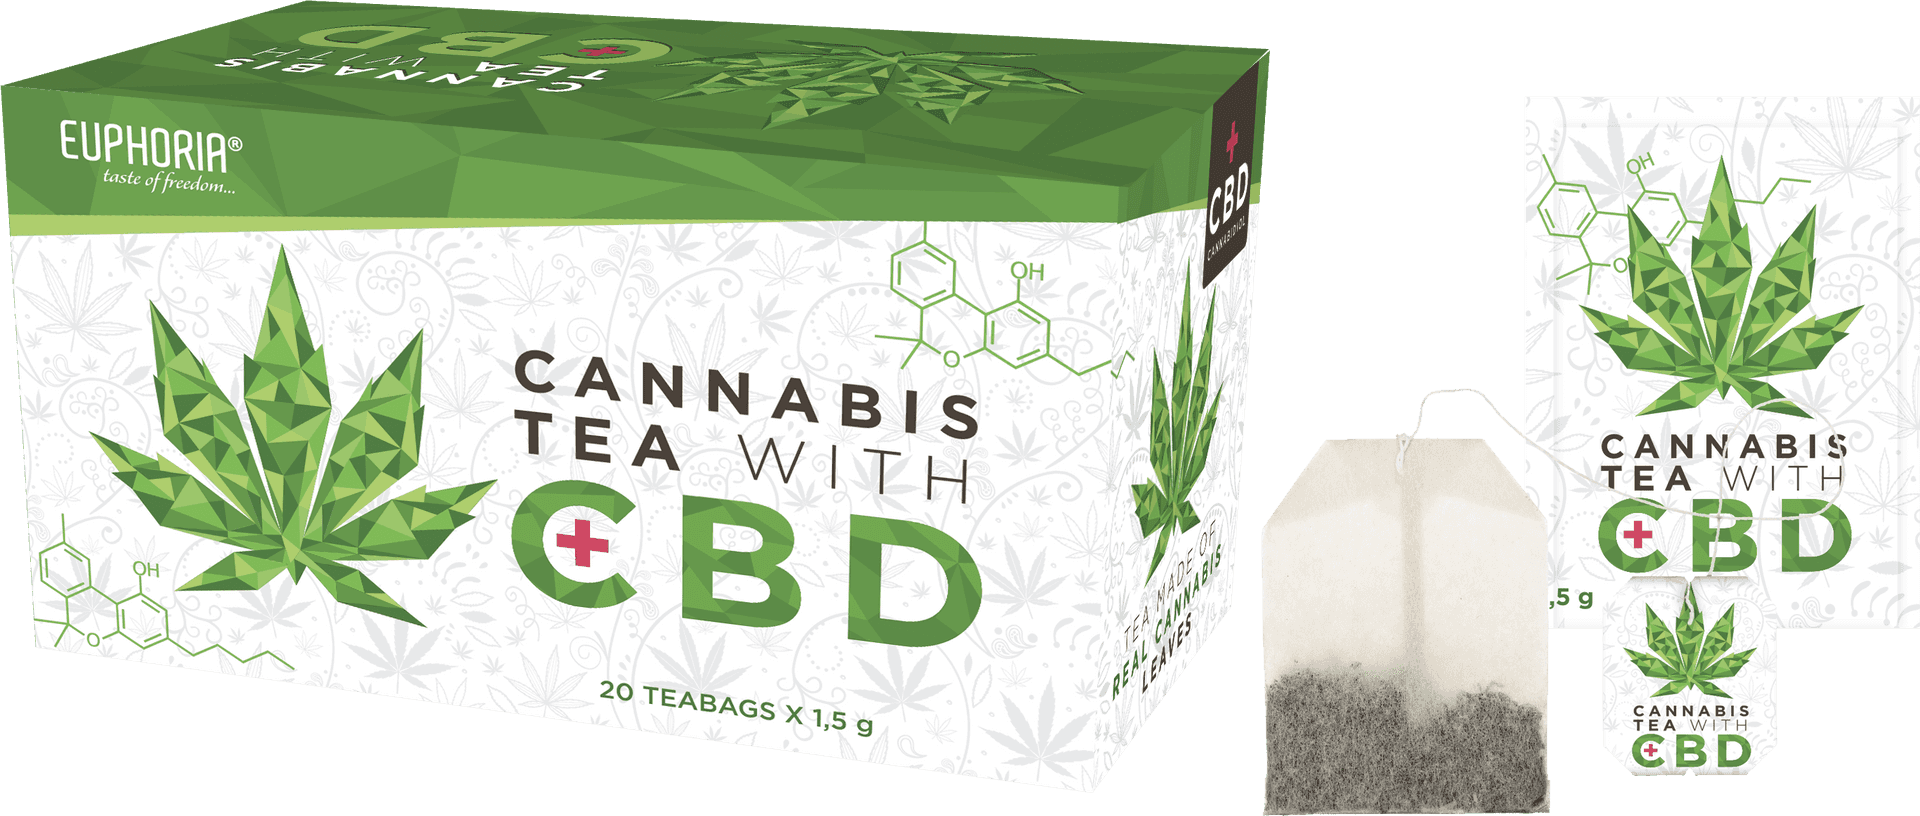 Cannabis C B D Tea Product Packaging PNG